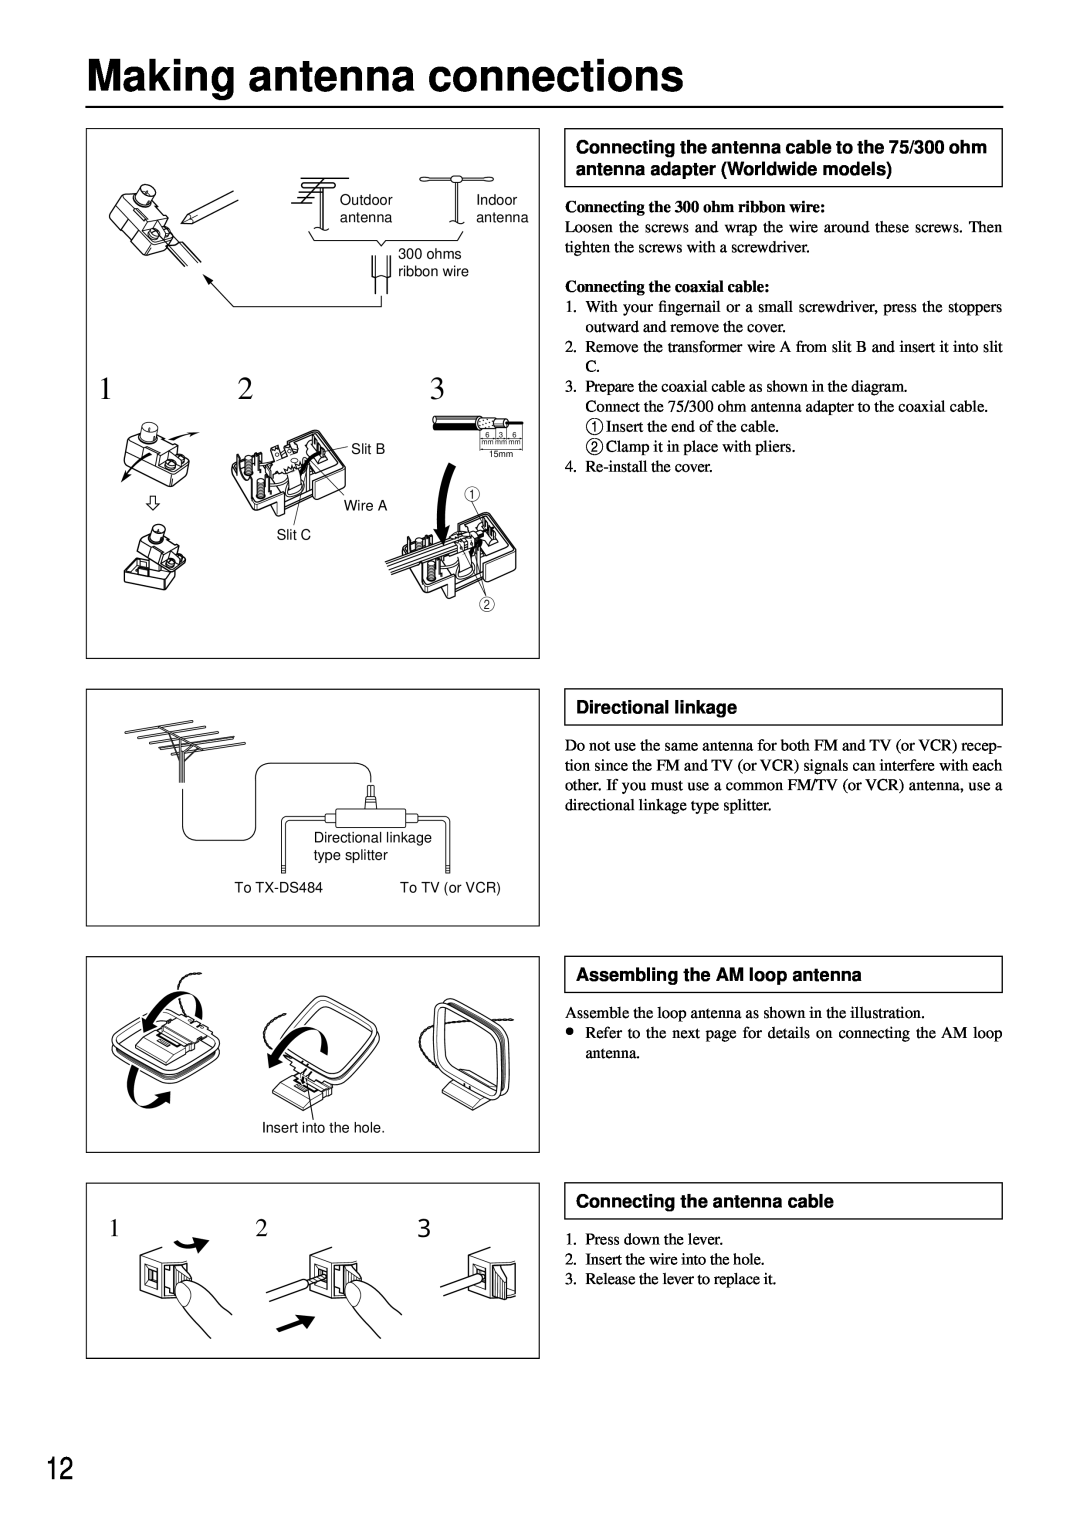 Onkyo TX-DS484 instruction manual Making antenna connections, Directional Iinkage, Assembling the AM loop antenna 